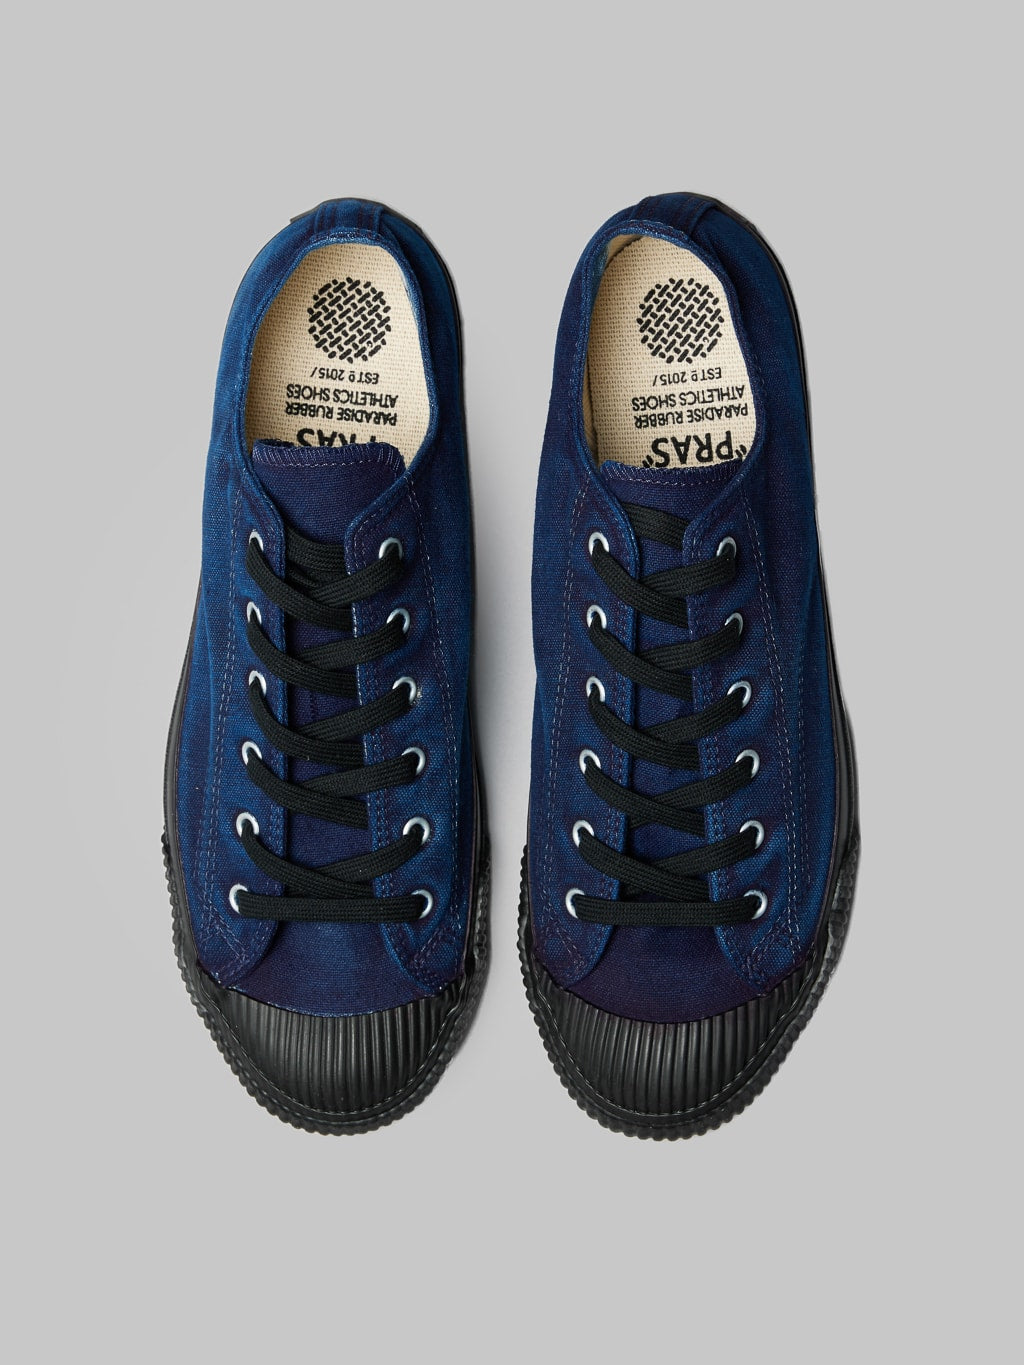 Pras shellcap low sneakers indigo hand dyed up view